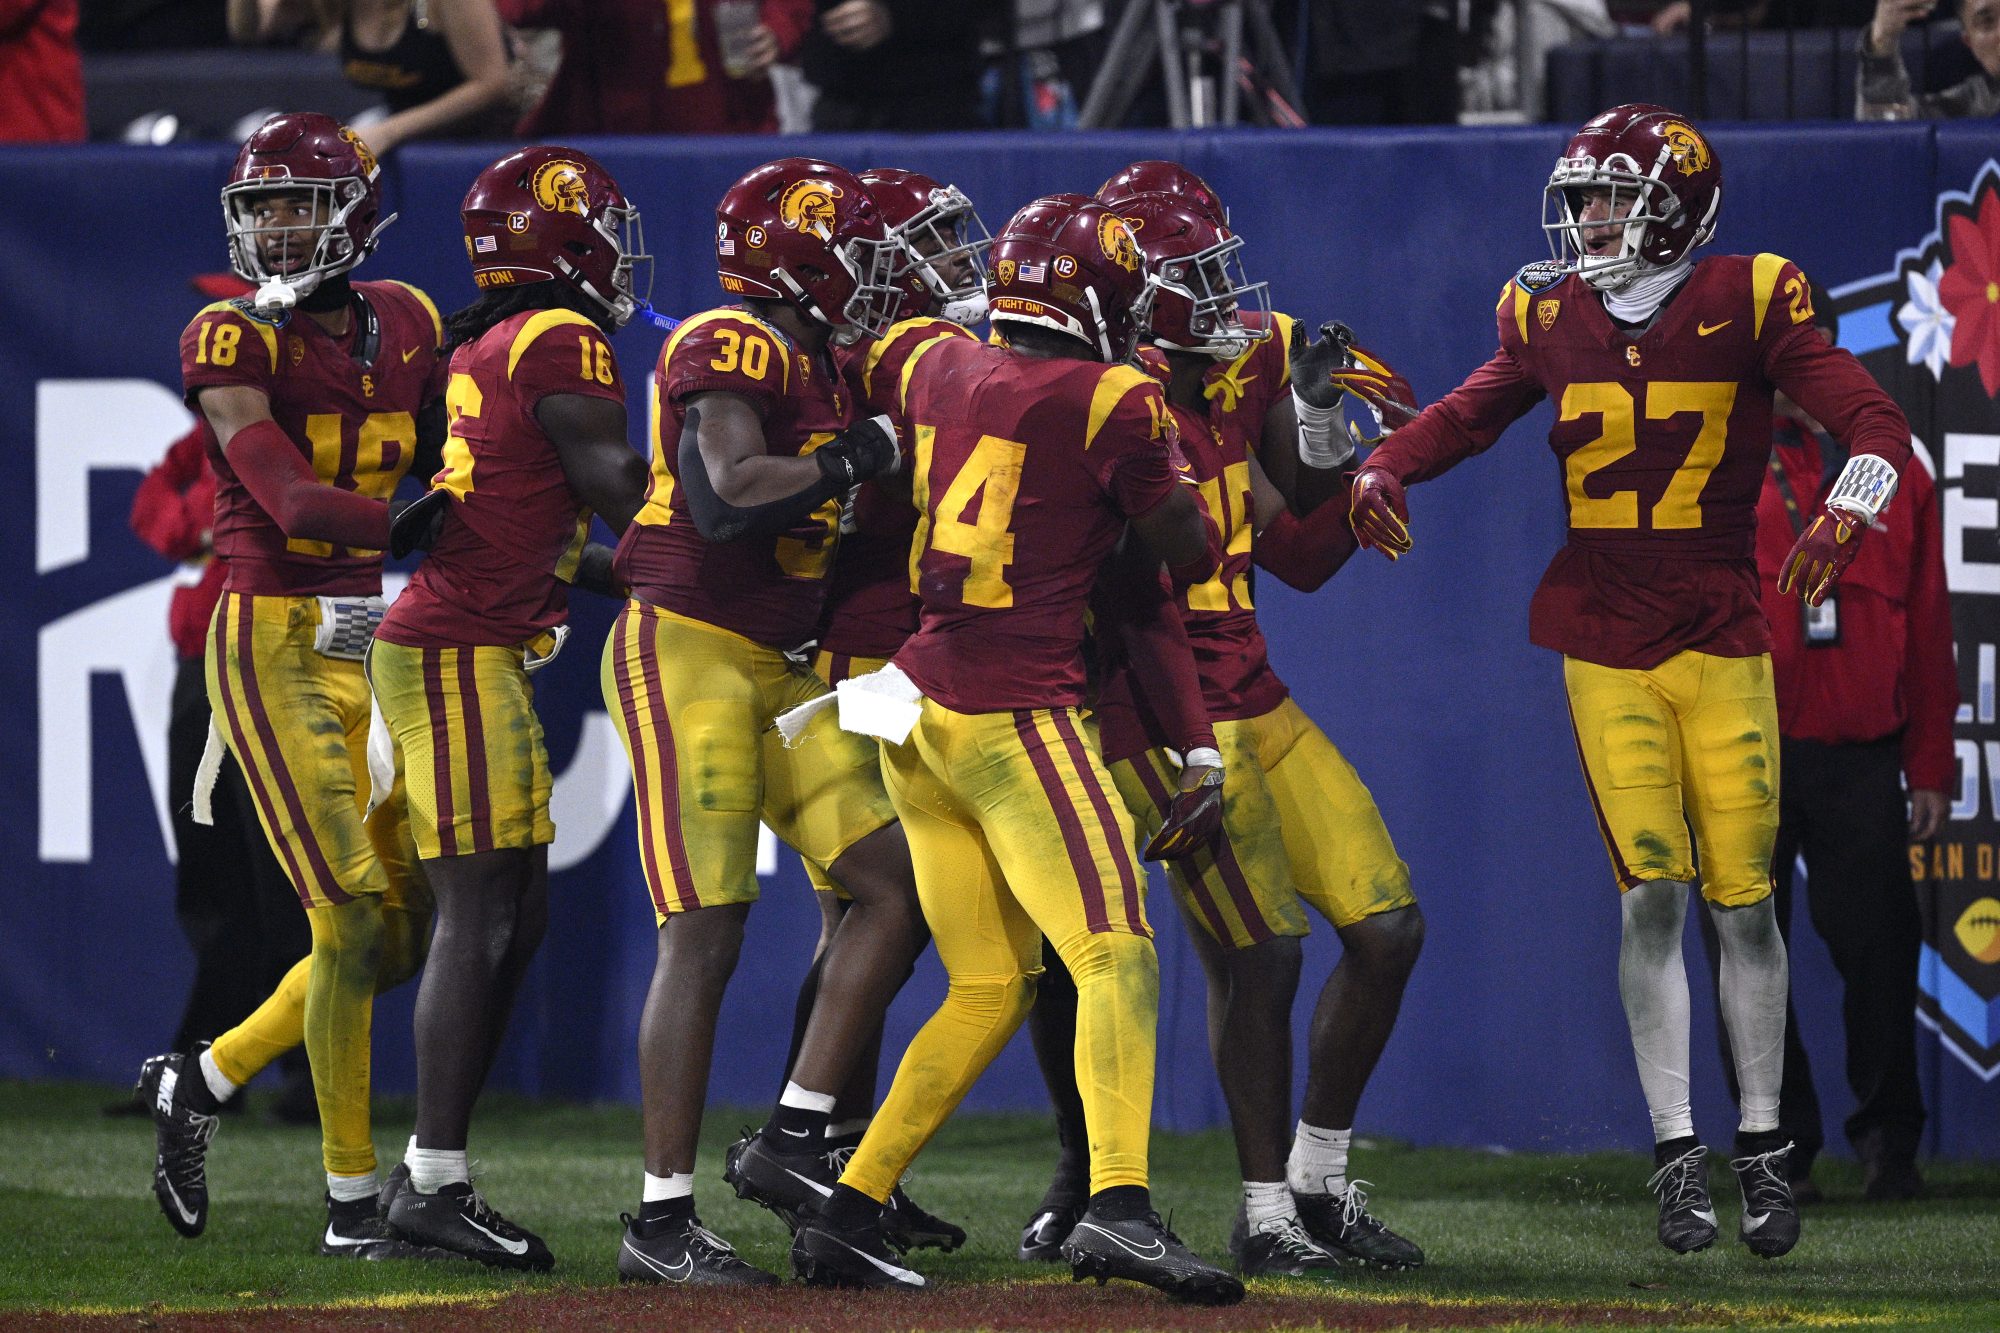 Dec 27, 2023; San Diego, CA, USA; USC Trojans players celebrate after a turnover against the Louisville Cardinals during the second half at Petco Park.